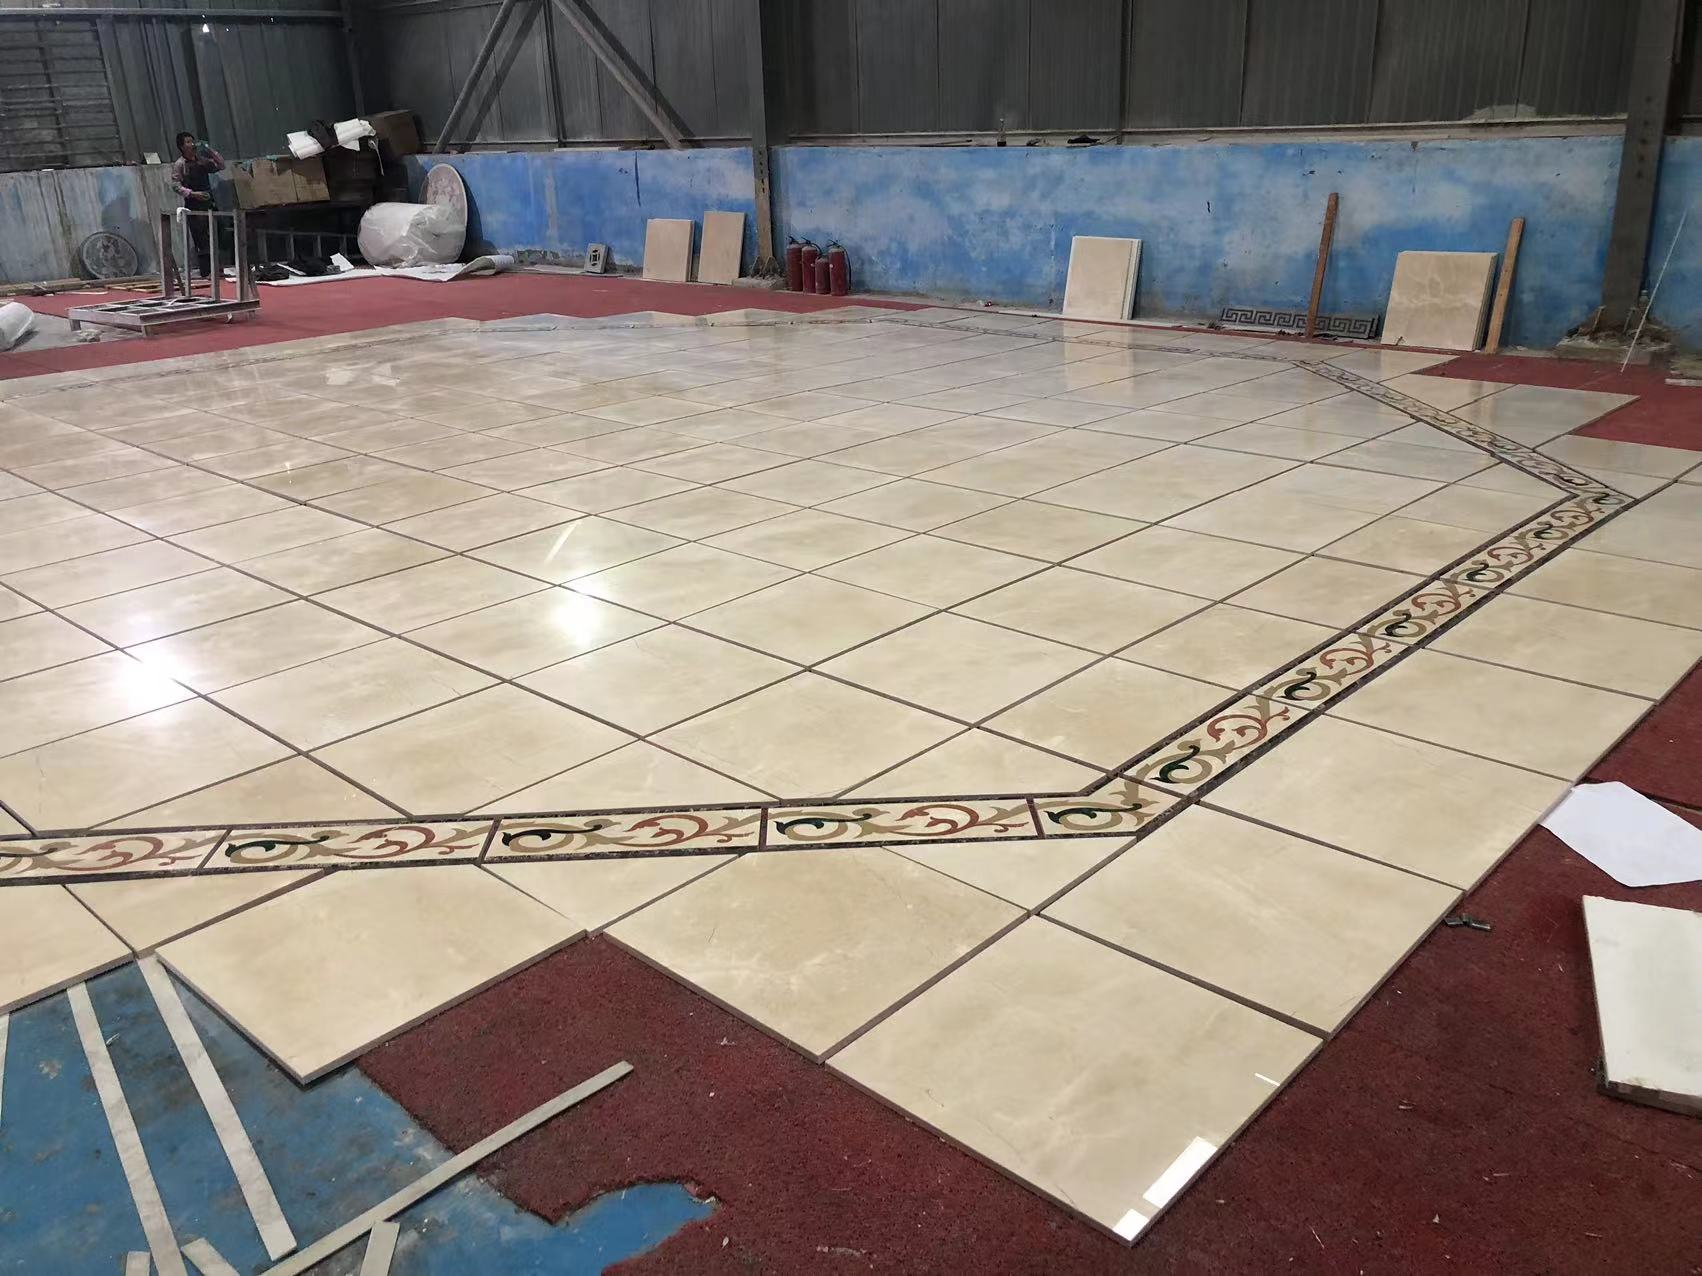 Crema marfil marble tiles lay out